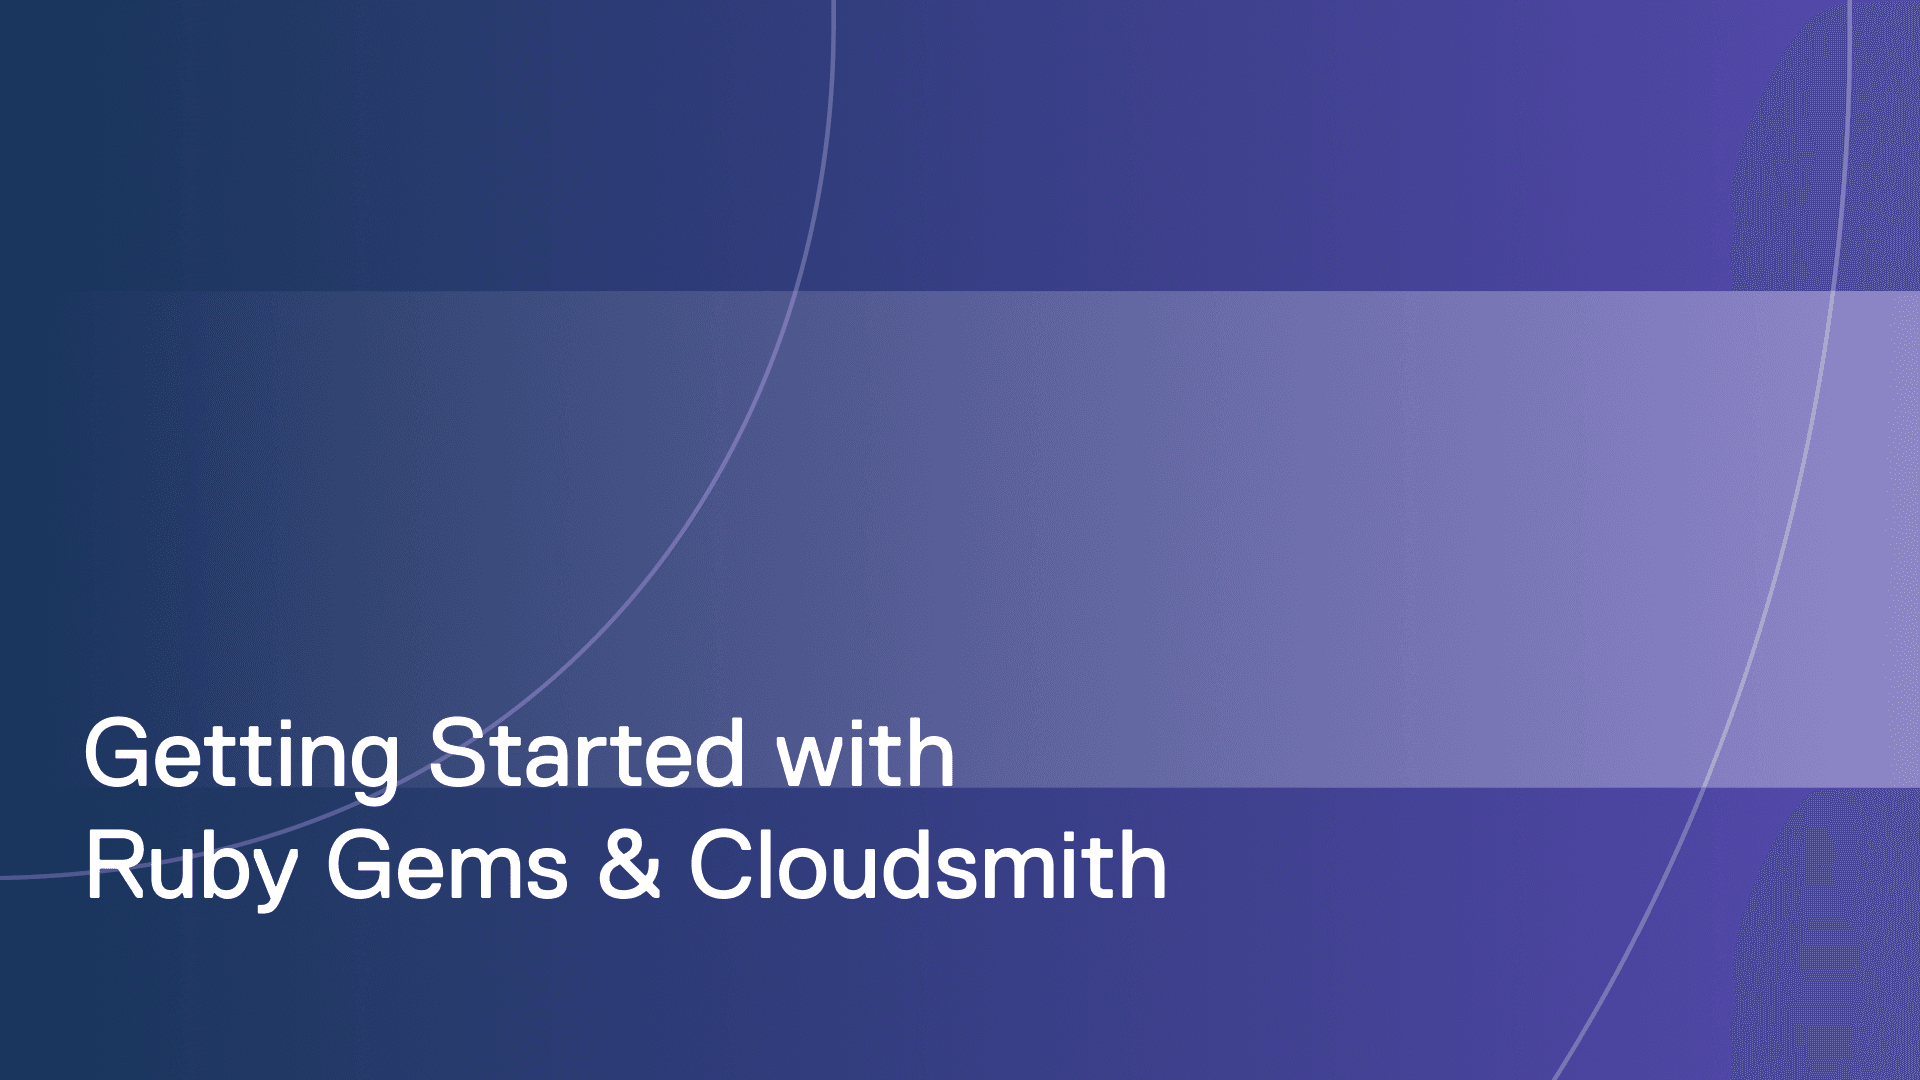 Getting started with Ruby Gems and Cloudsmith